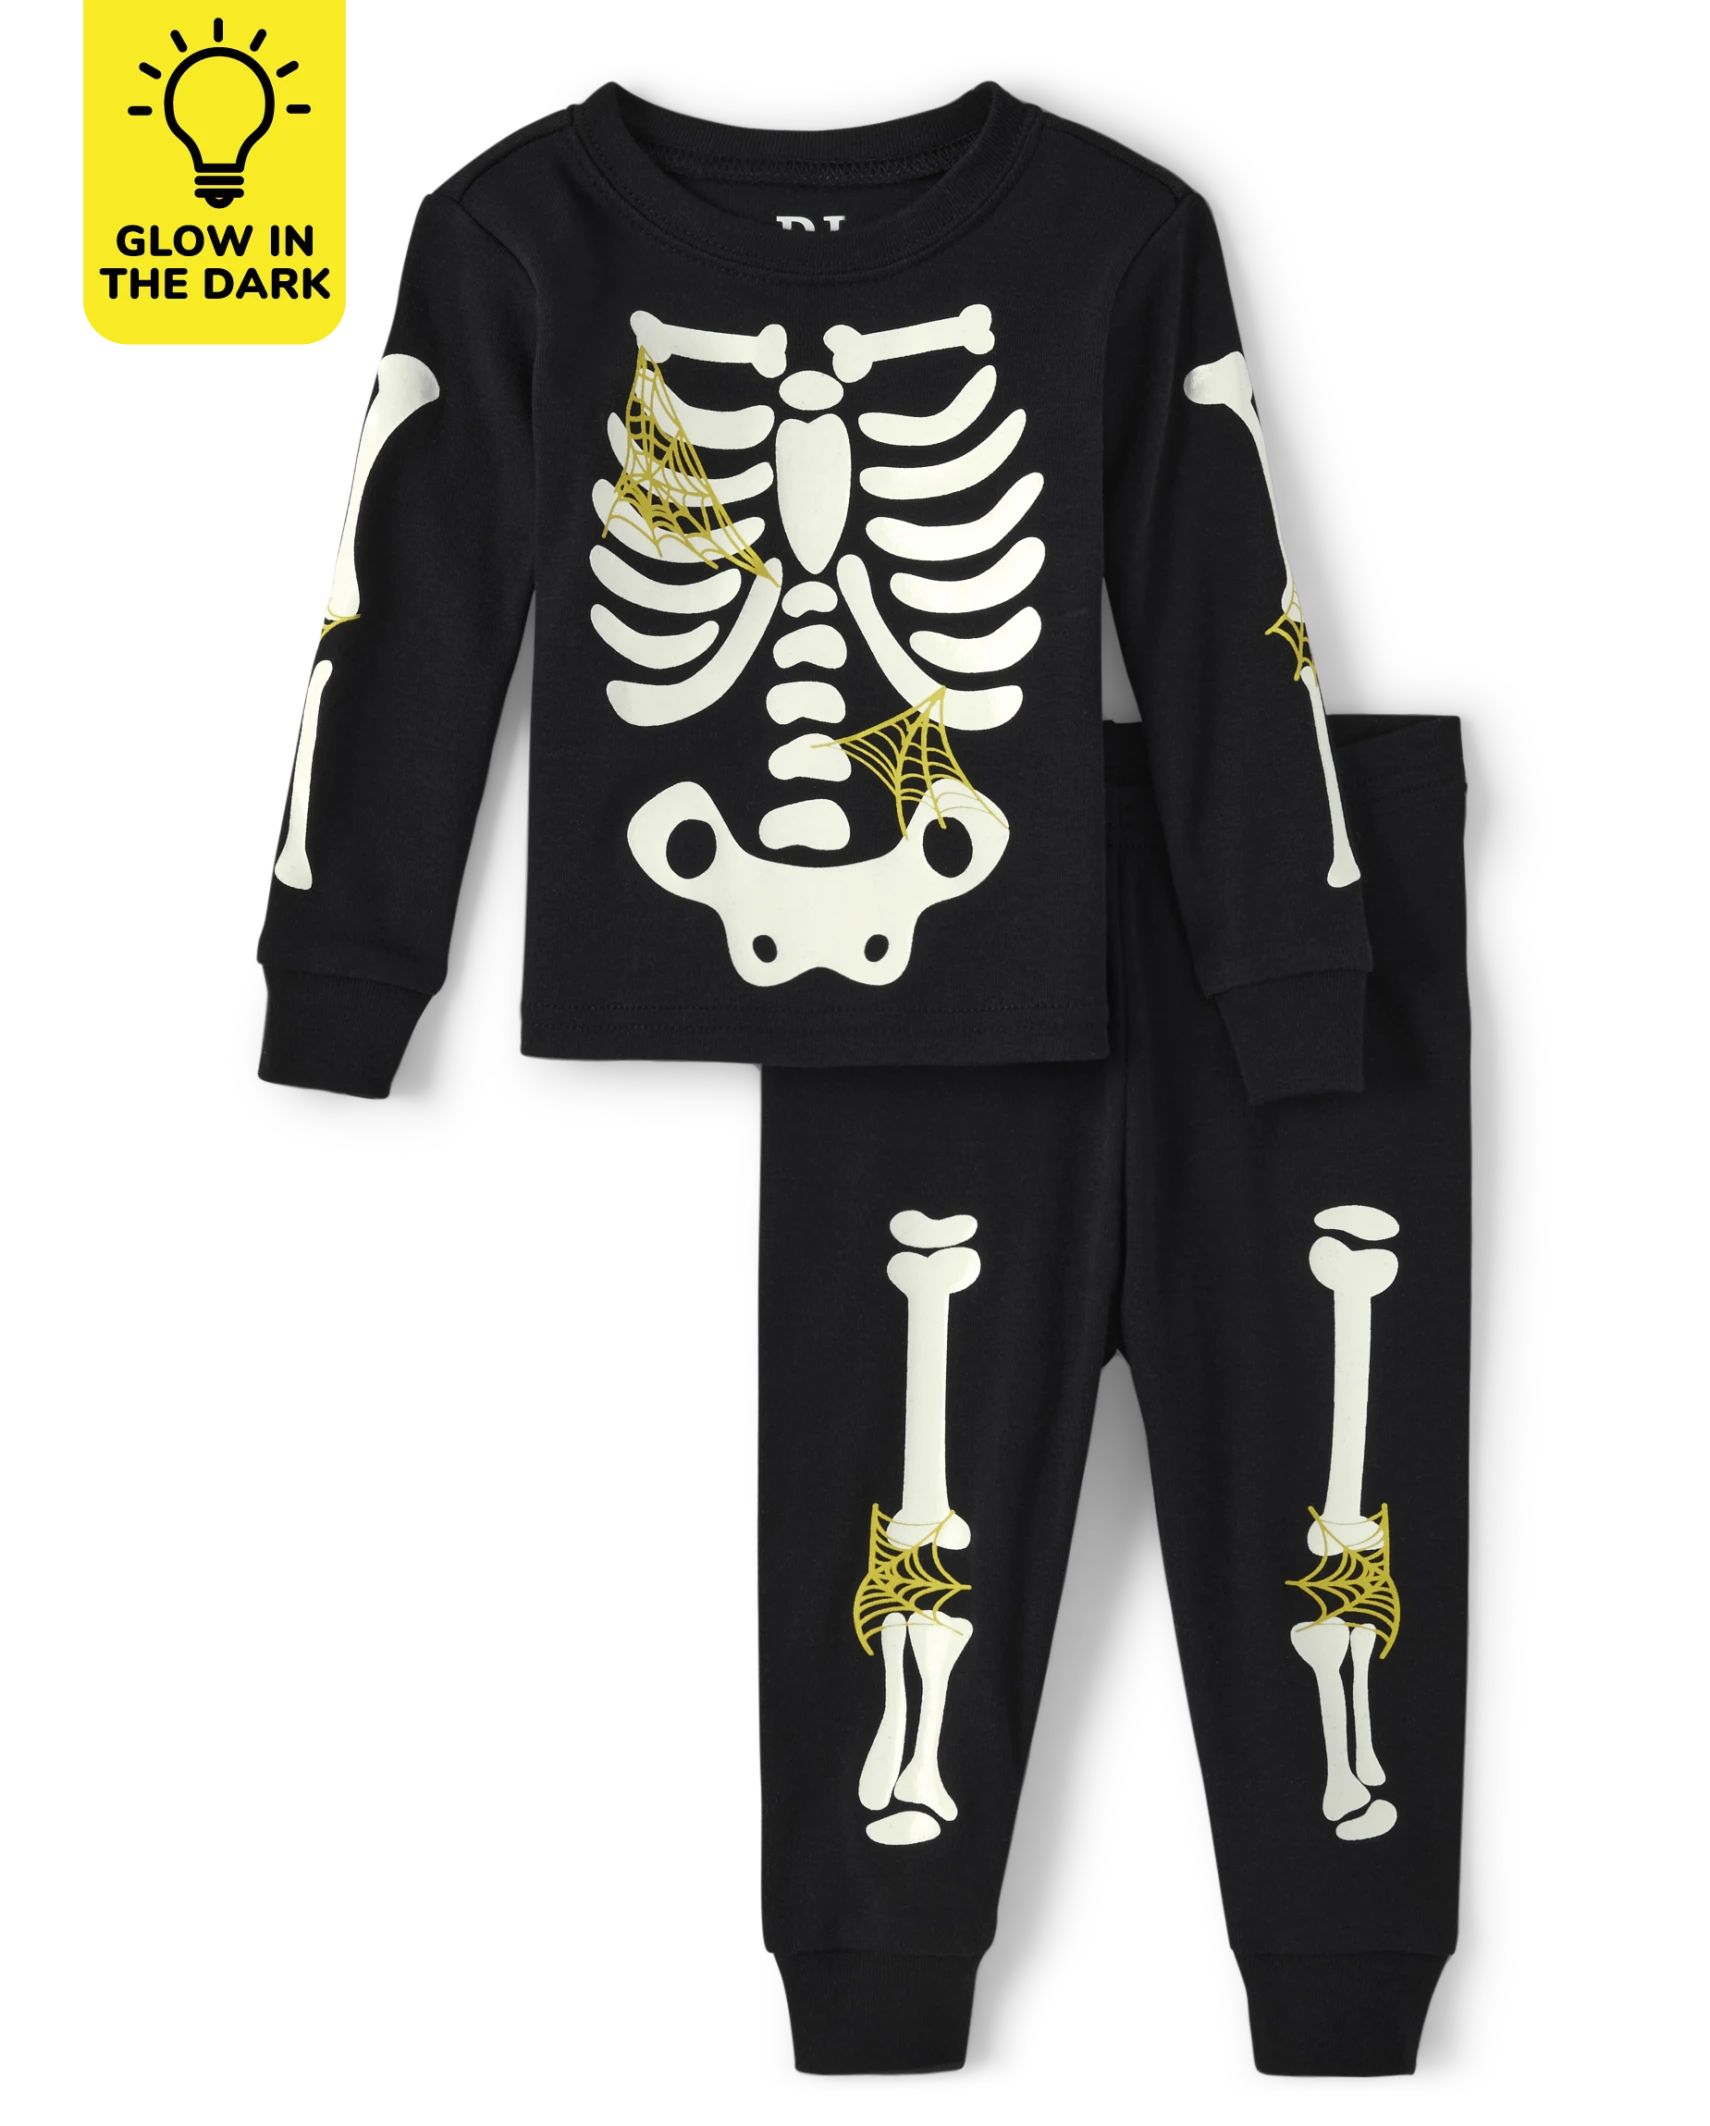 Unisex Baby And Toddler Matching Family Glow Skeleton Snug Fit Cotton Pajamas - black | The Children's Place